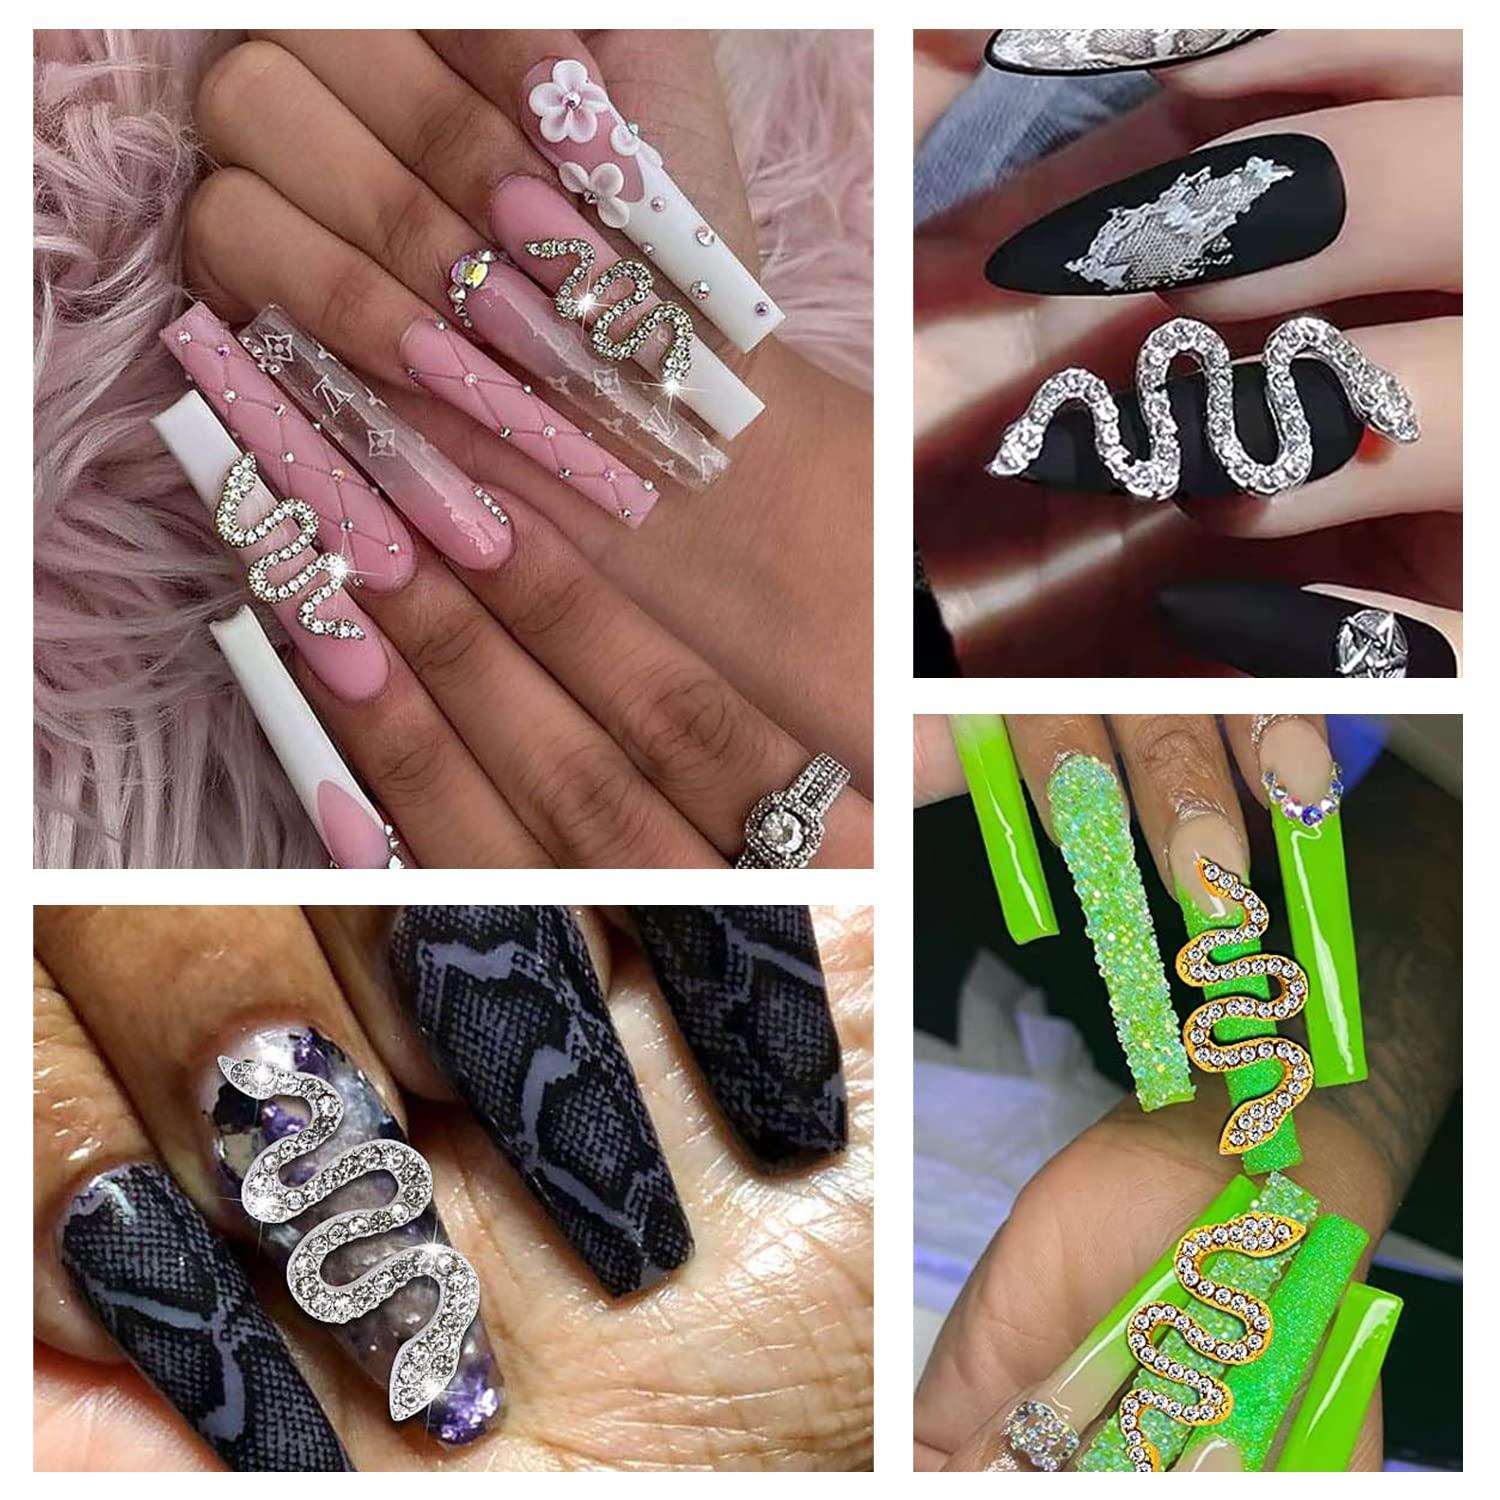 Get Ready to Be Obsessed with These Nail Art Ideas